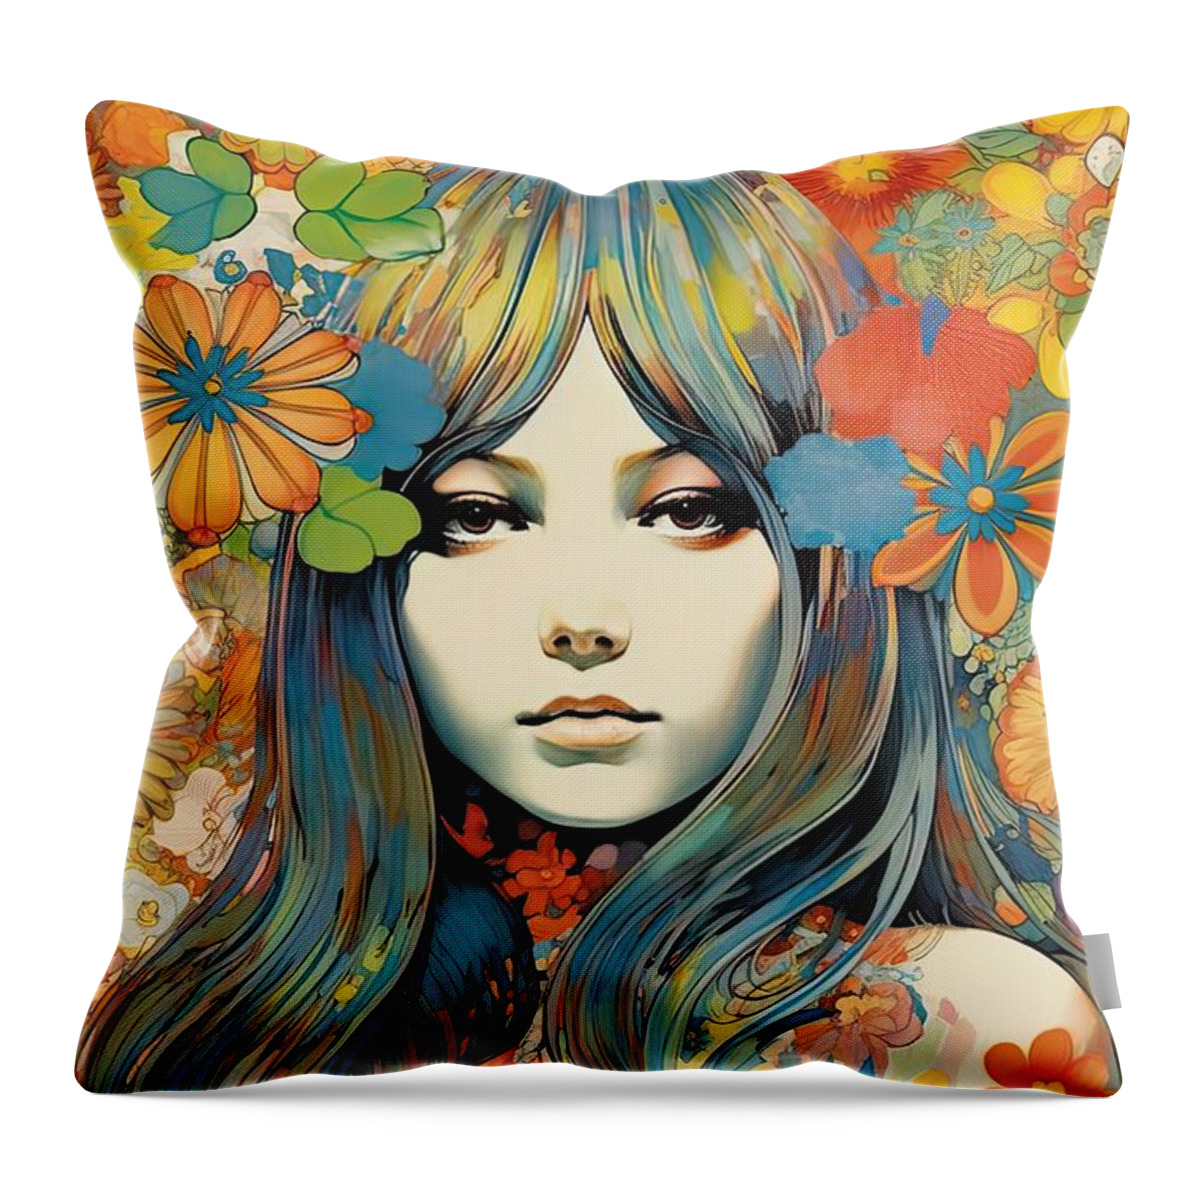 Seventies Throw Pillow featuring the painting Hippie Chix III by Mindy Sommers